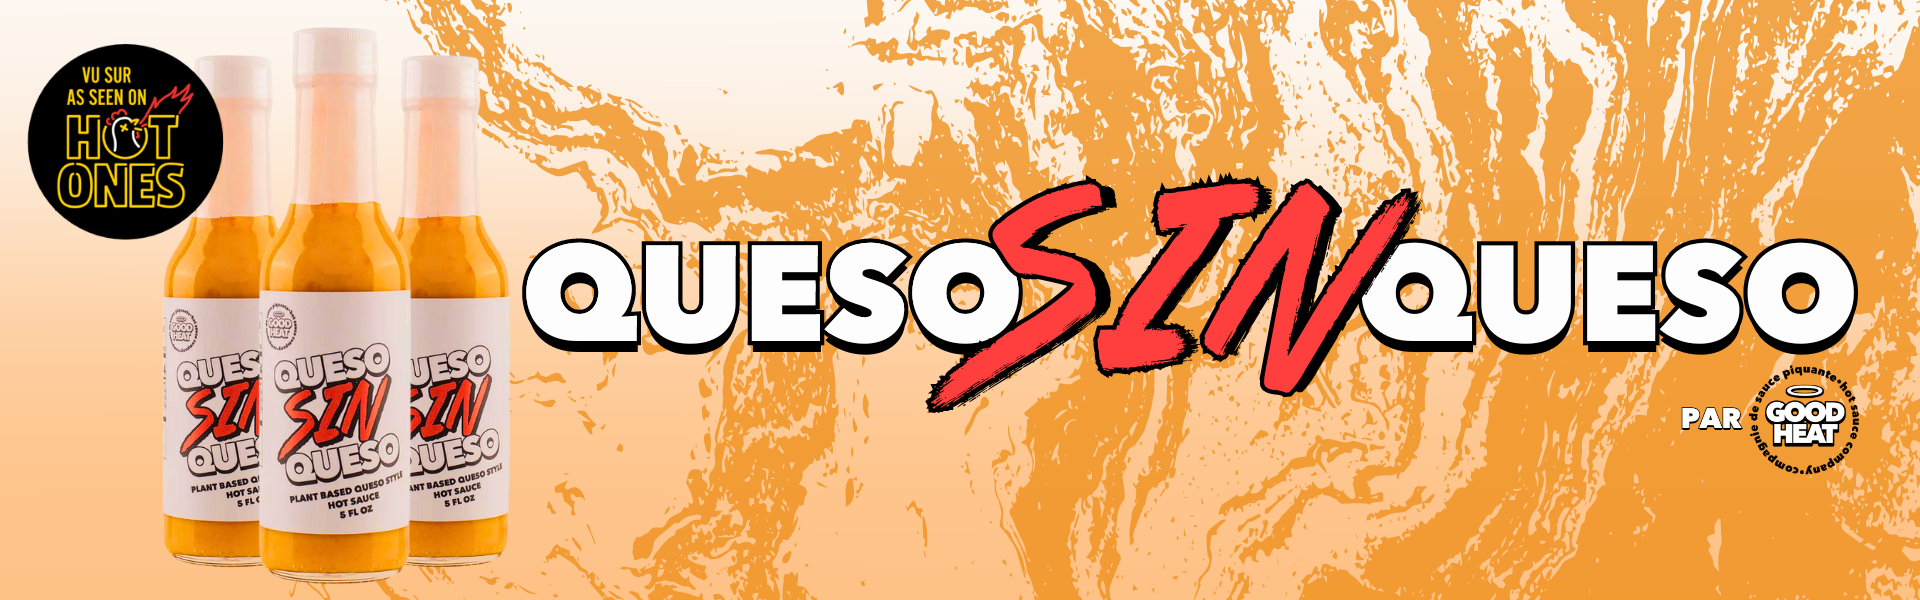 Queso sin quest good heat hot sauce piquante hot ones